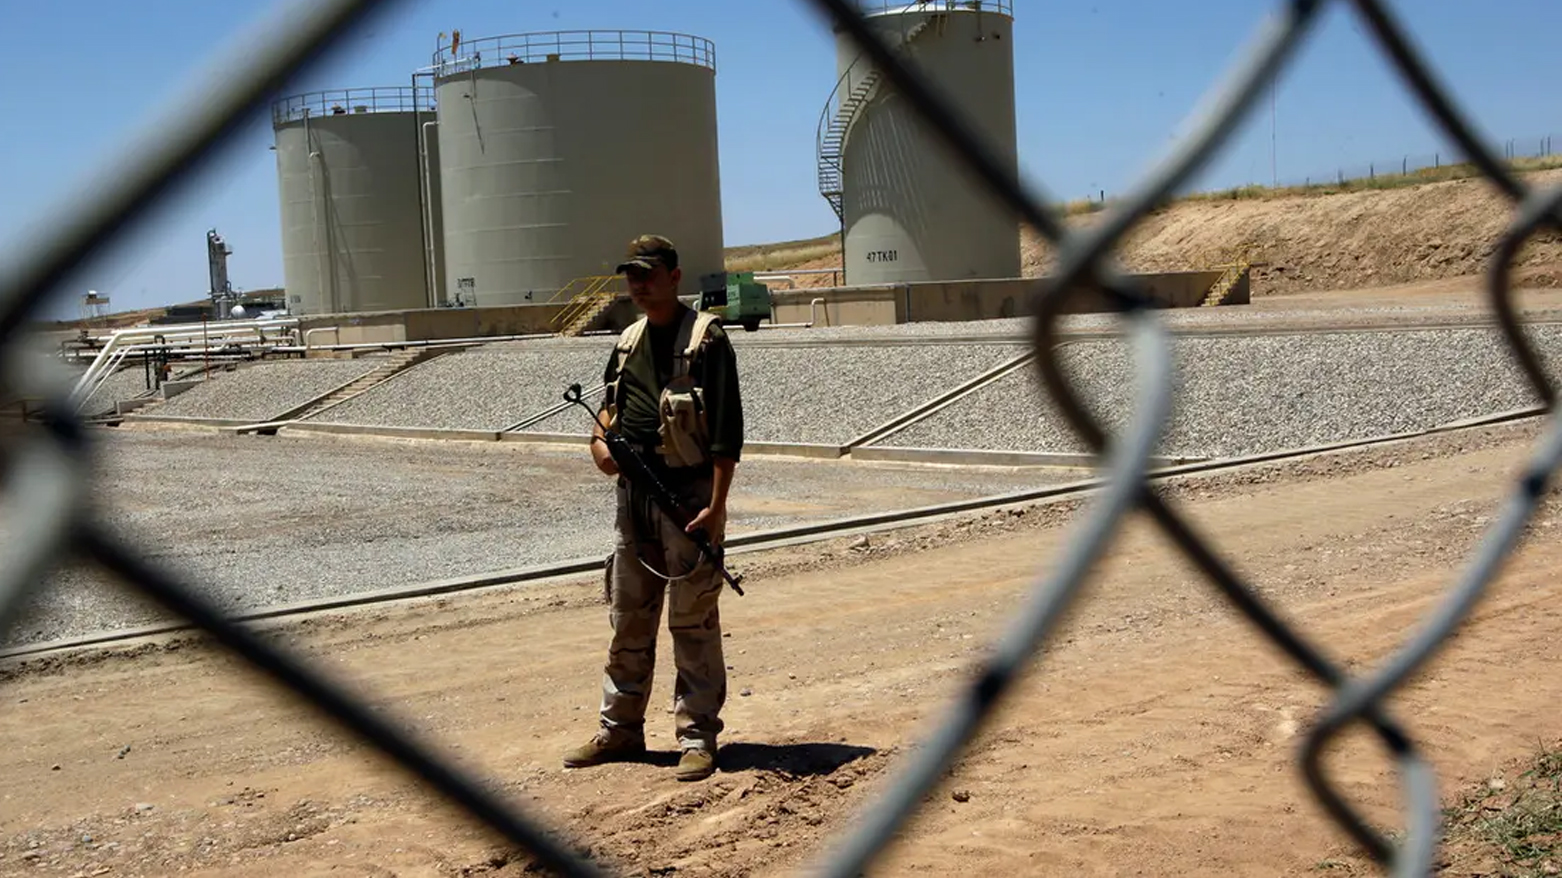 A security guard is seen at the Tawke oil refinery in the Kurdistan Region's Zakho district, May 31, 2009. (Photo: AFP)